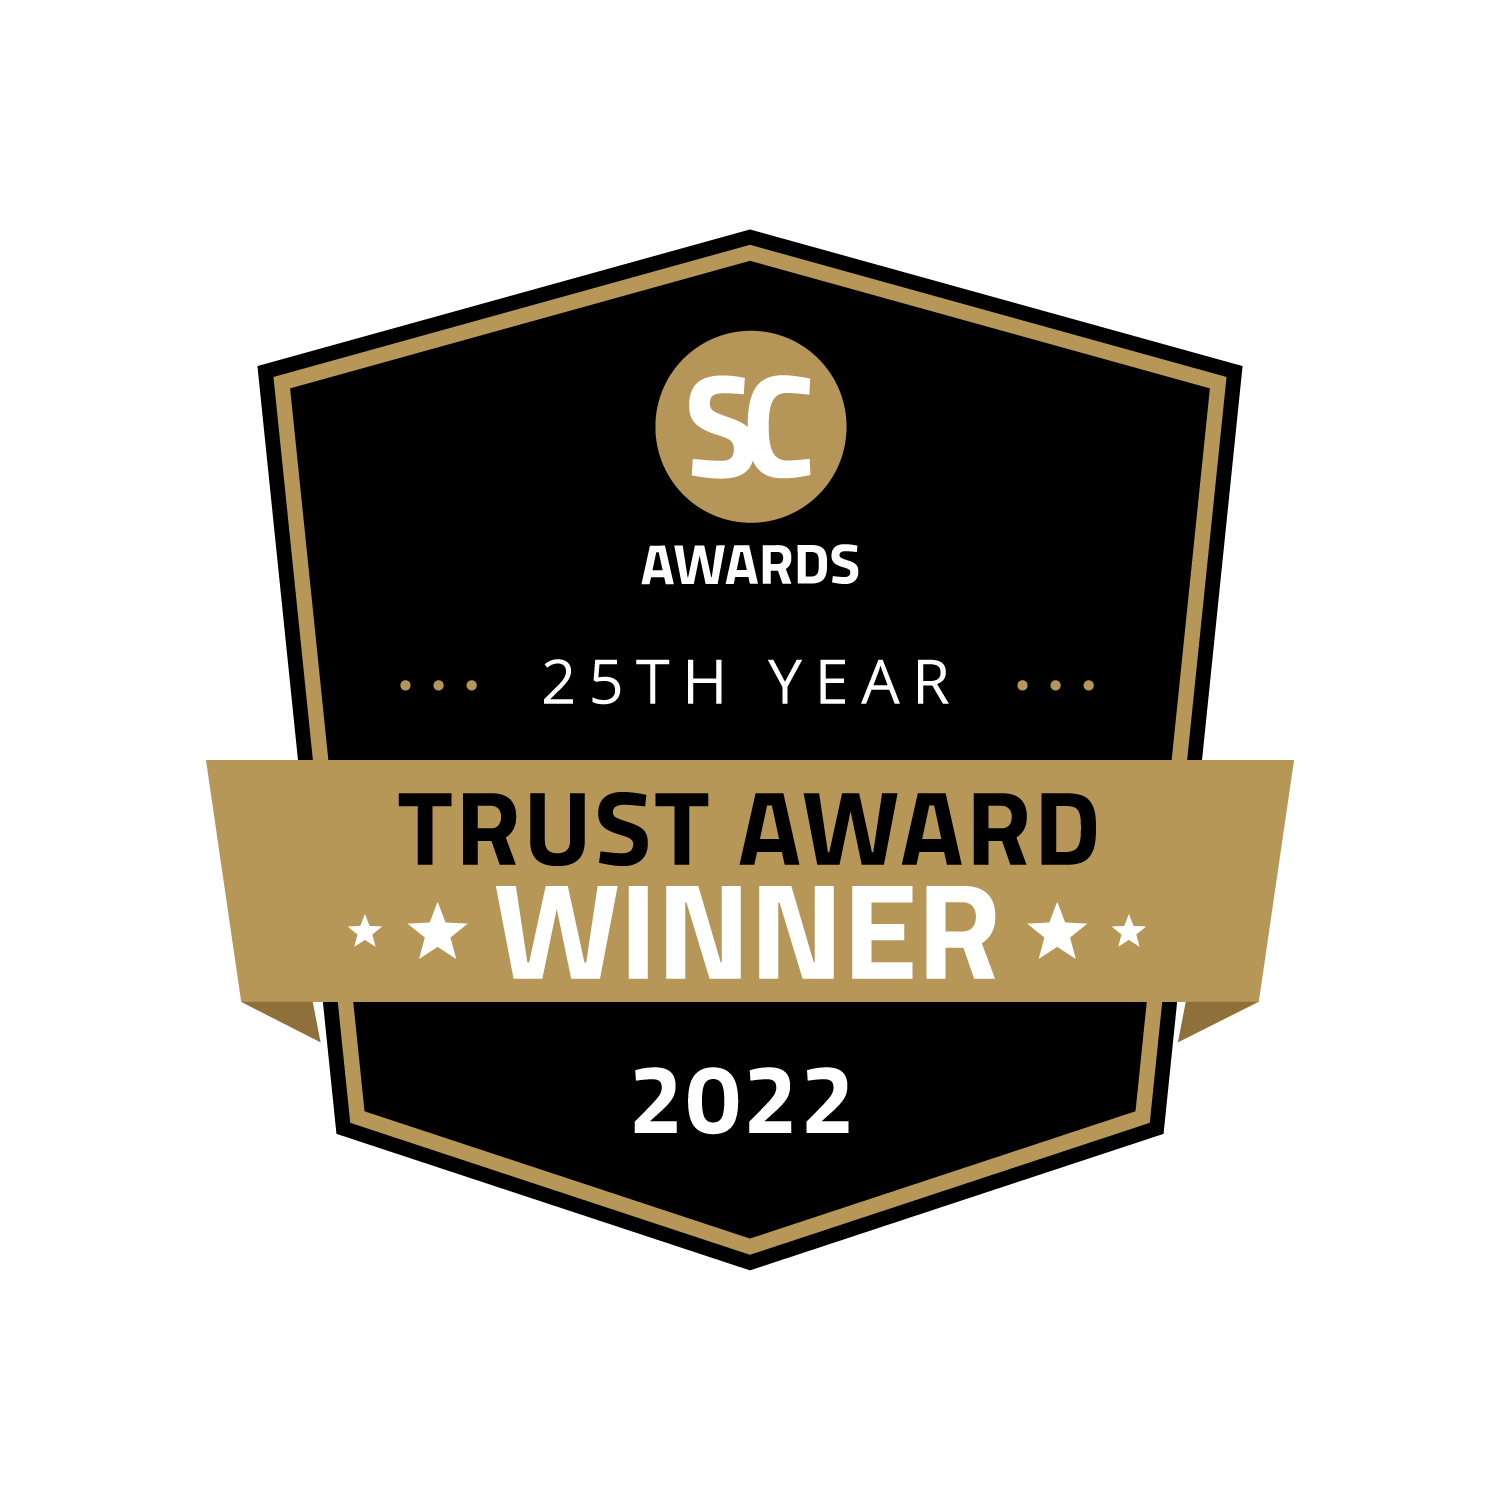 Badge of the SC Awards for 25th year. We are a Trust Award Winner for 2022.